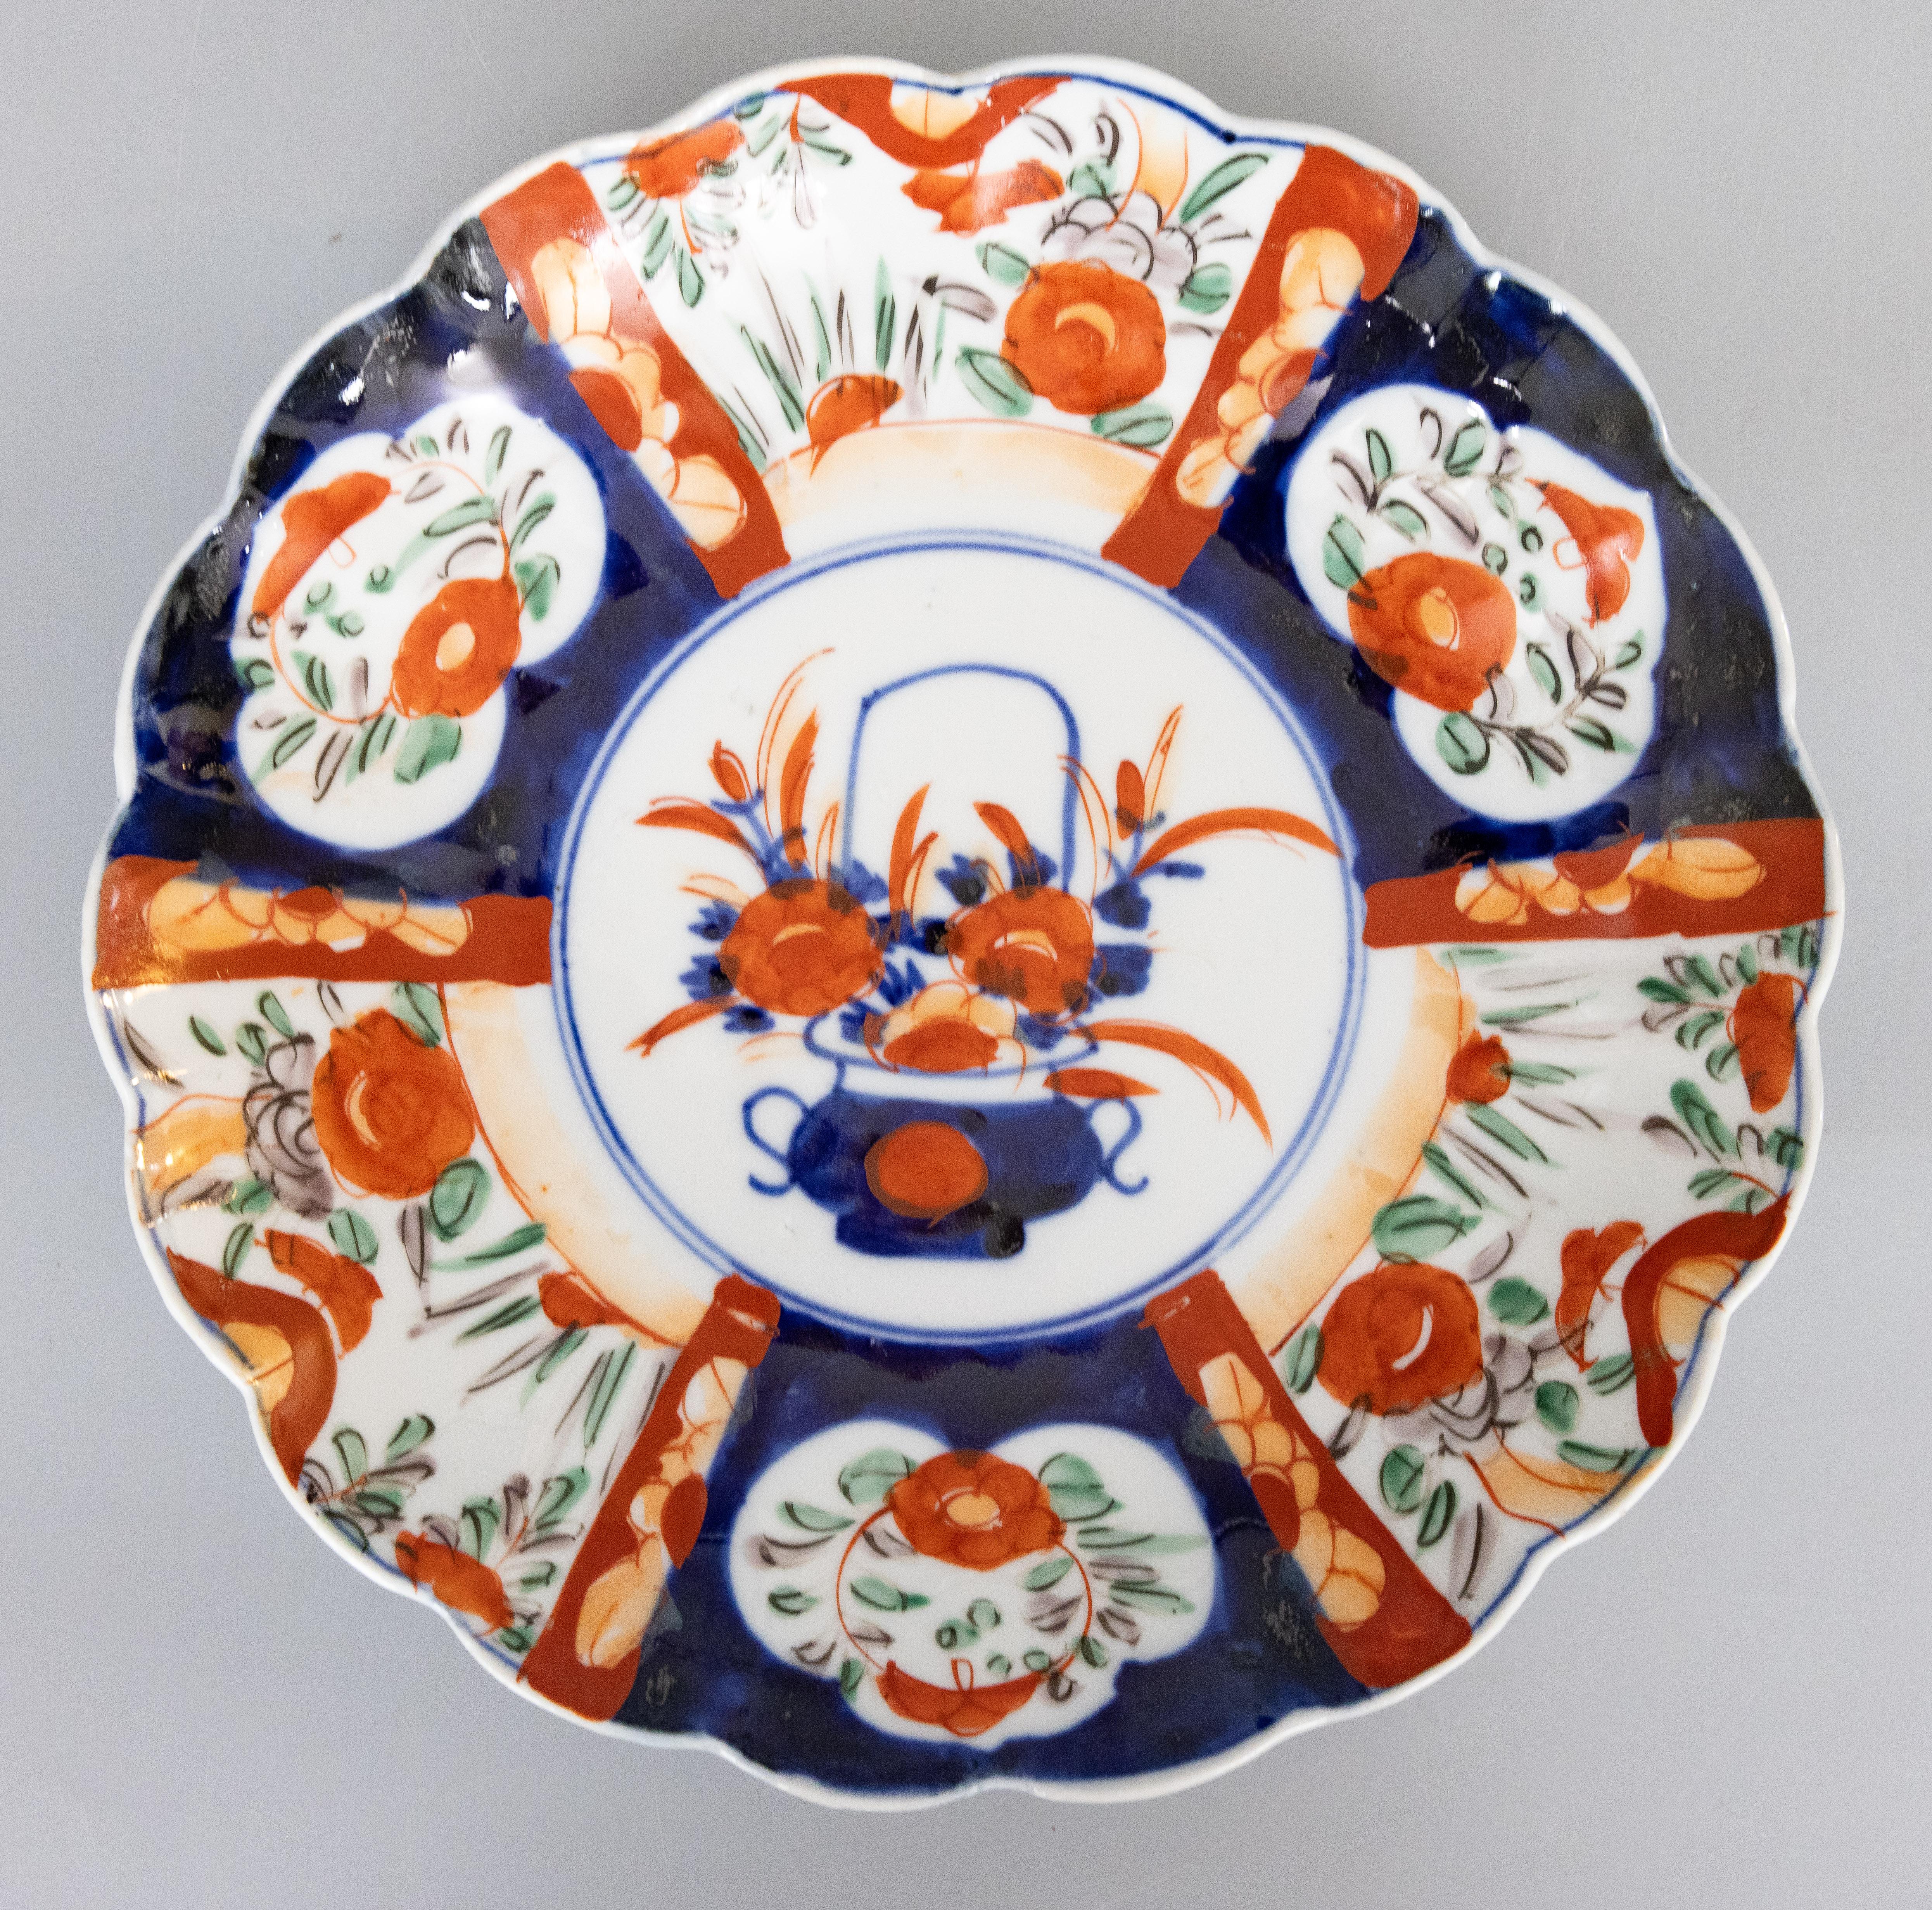 19th Century Japanese Meiji Period Imari Scalloped Charger Plate For Sale 1